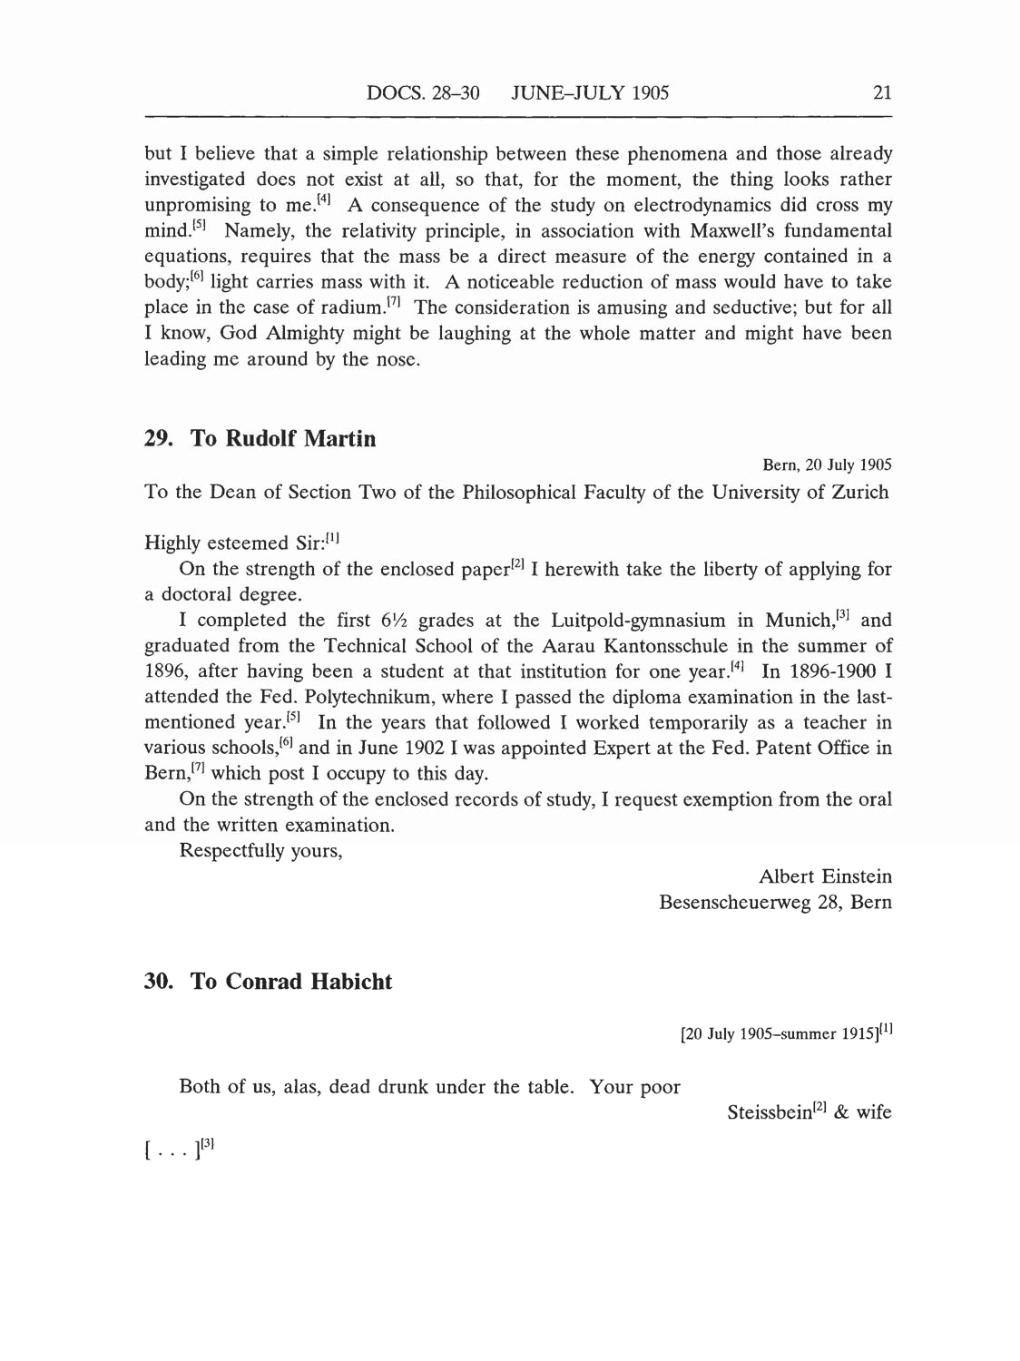 Volume 5: The Swiss Years: Correspondence, 1902-1914 (English translation supplement) page 21